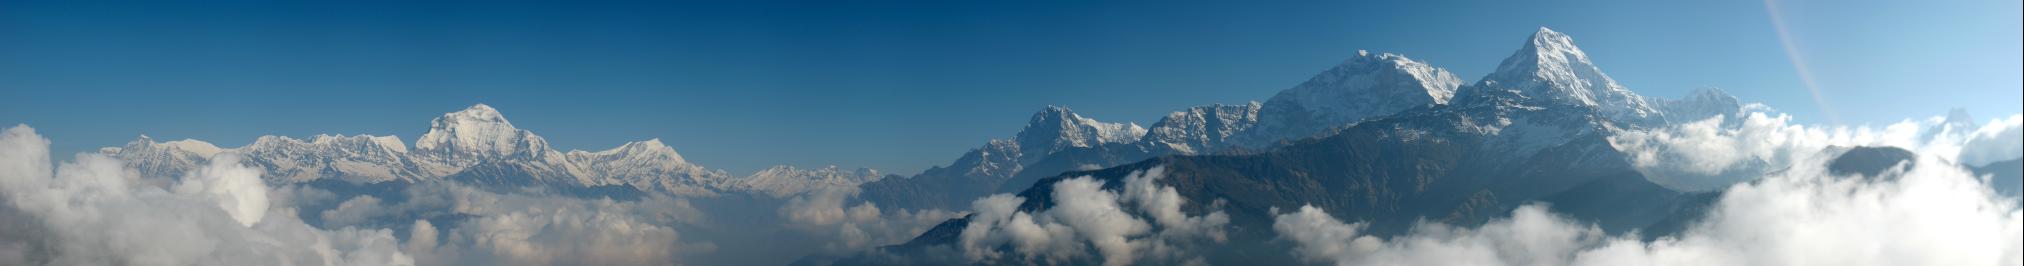 Day 21: View from Poon Hill